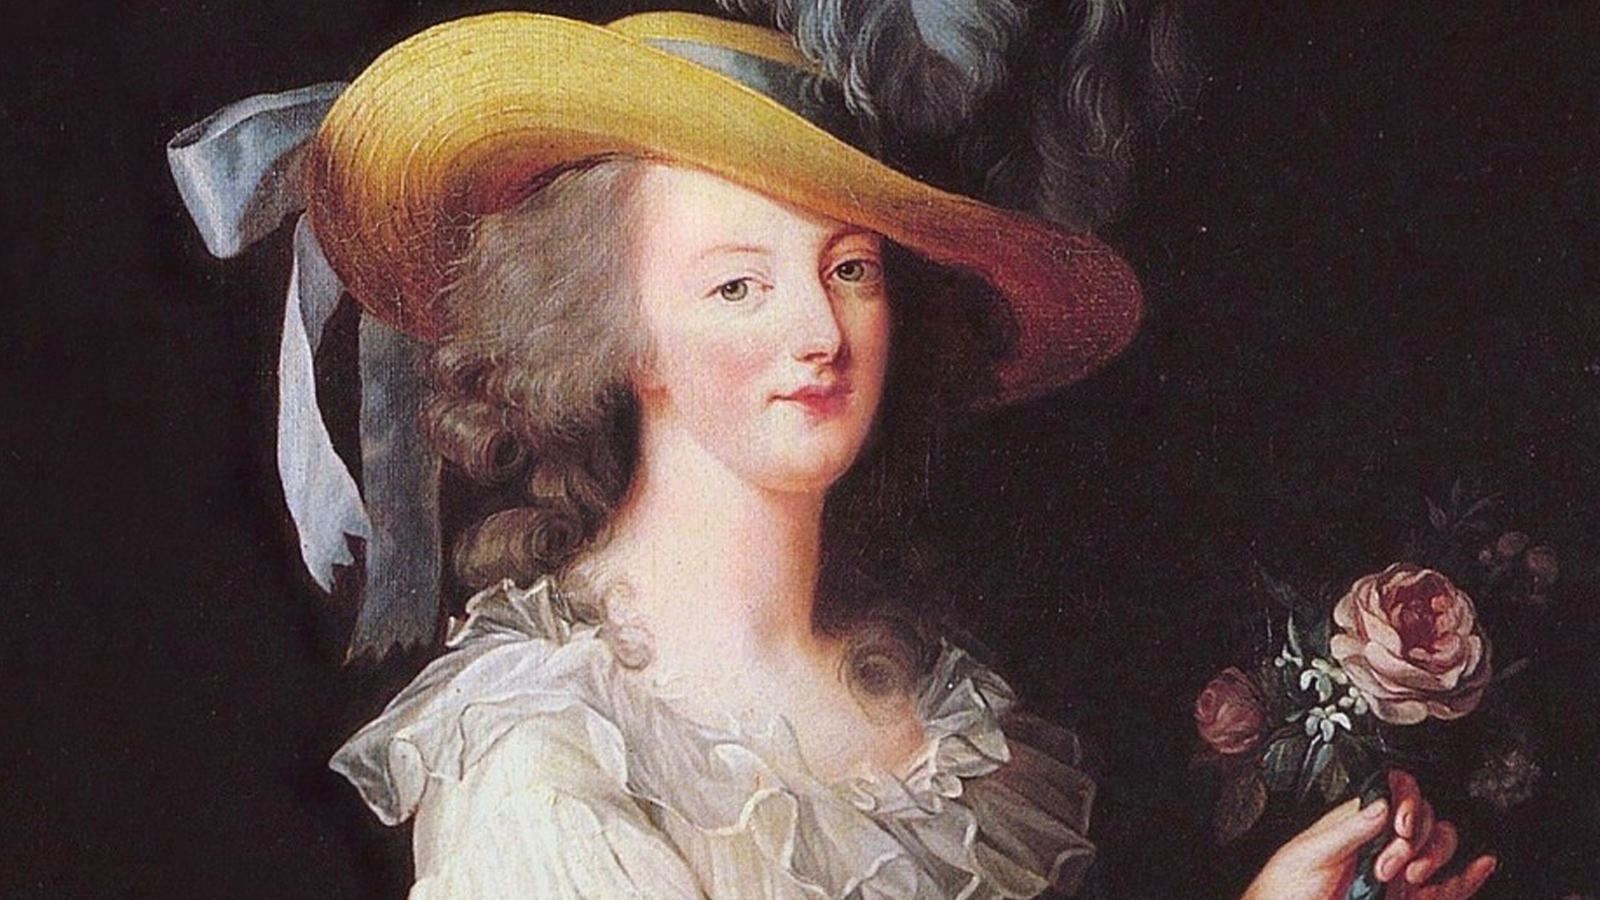 The picture is a painting of the French queen Marie Antoinette.